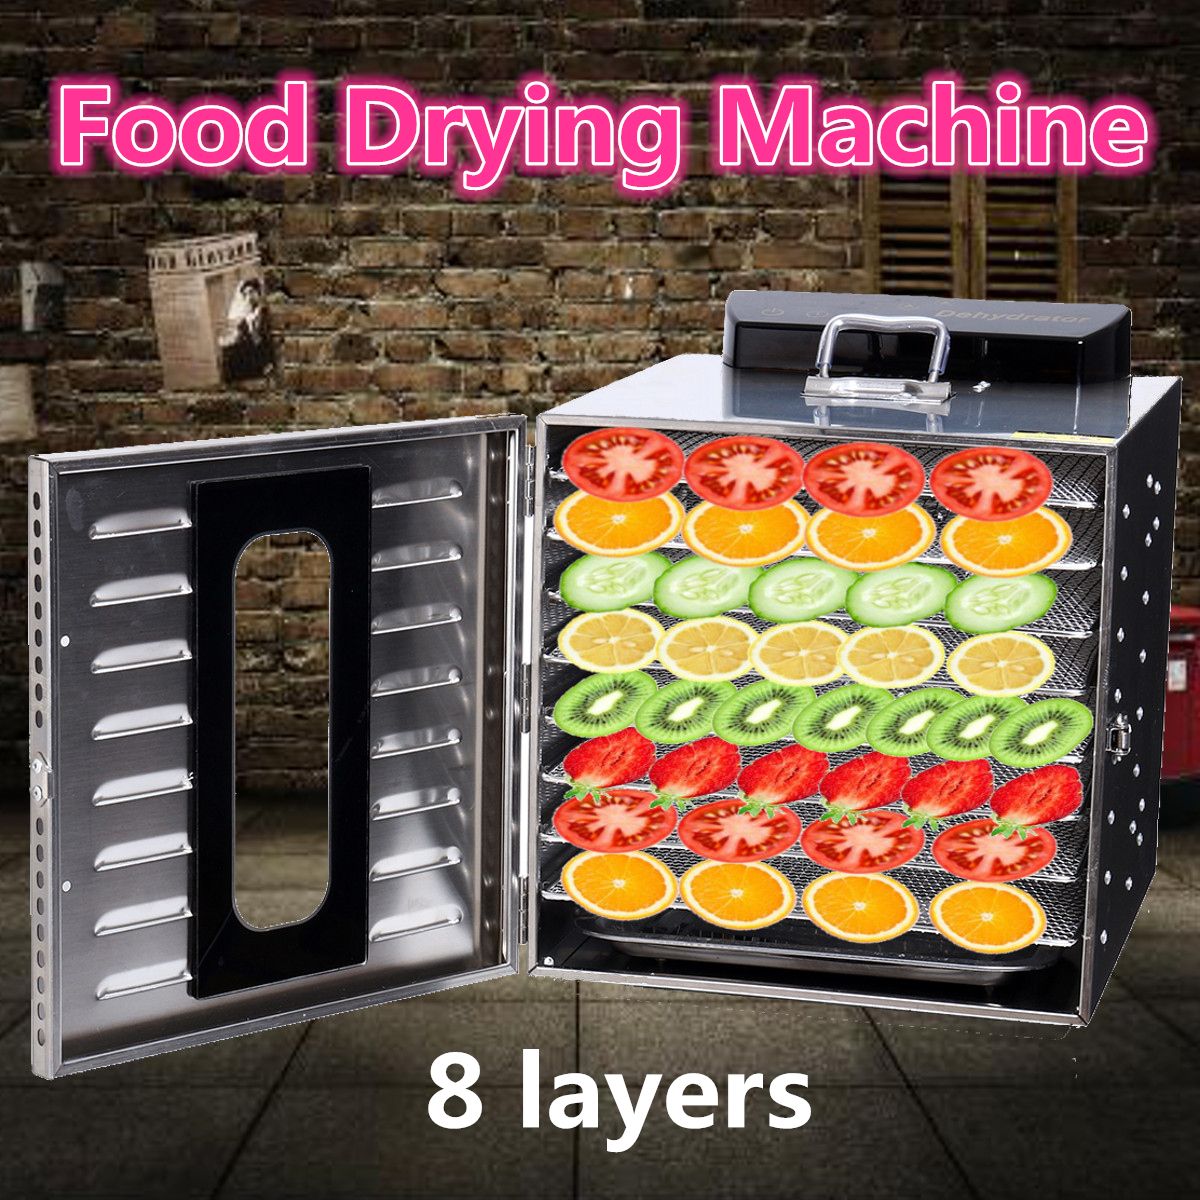 8-Tray-Food-Drying-Machine-Jerky-Stainless-Steel-Fruit-Dryer-Maker-Commercial-Dehumidification-1298432